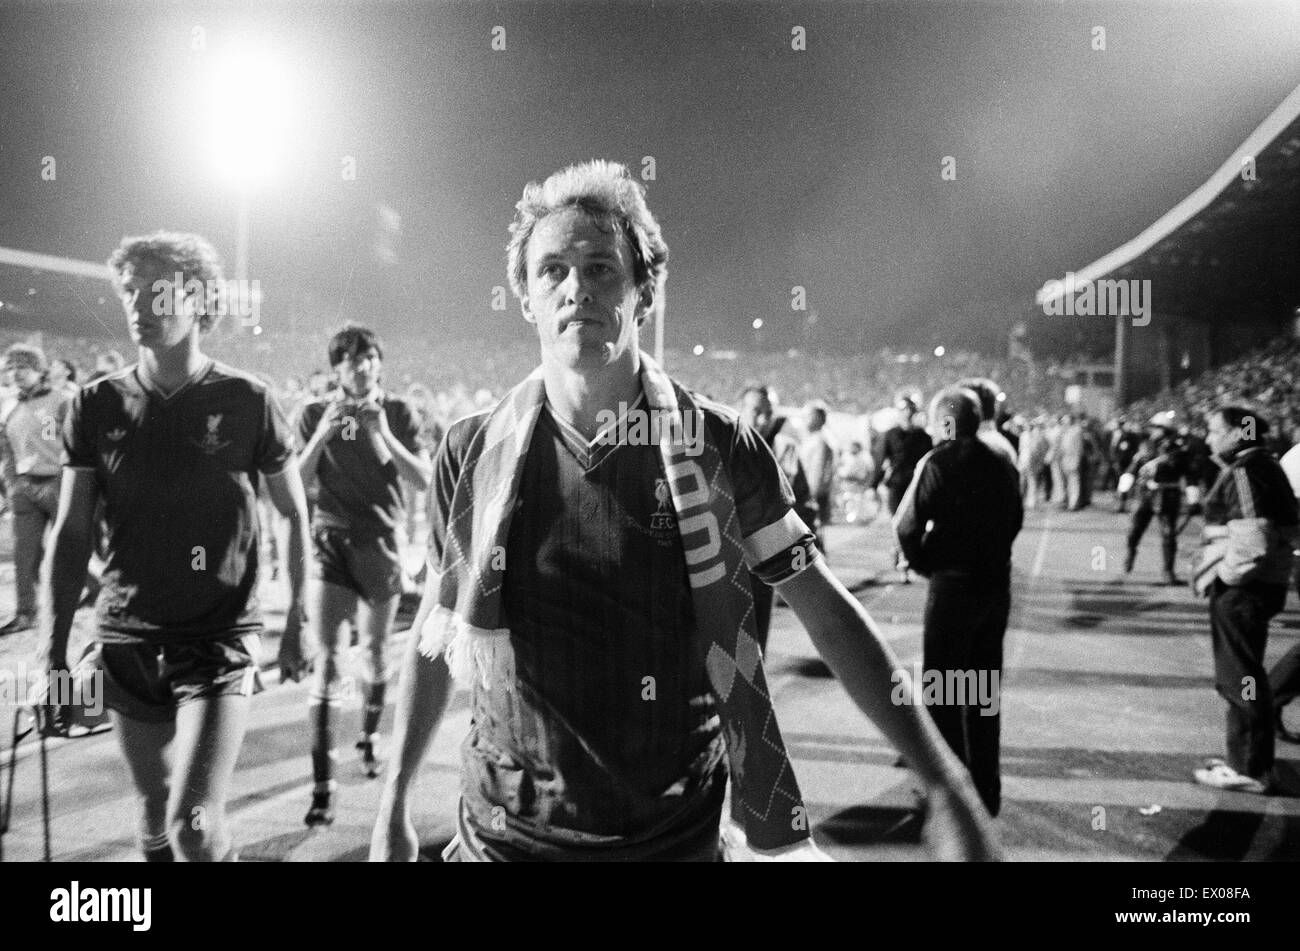 Juventus 1-0 Liverpool, 1985 European Cup Final, Heysel Stadium, Brussels, Belgium, Wednesday 29th May 1985. Match Action. Liverpool Captain Phil Neal walks off pitch after match. Stock Photo